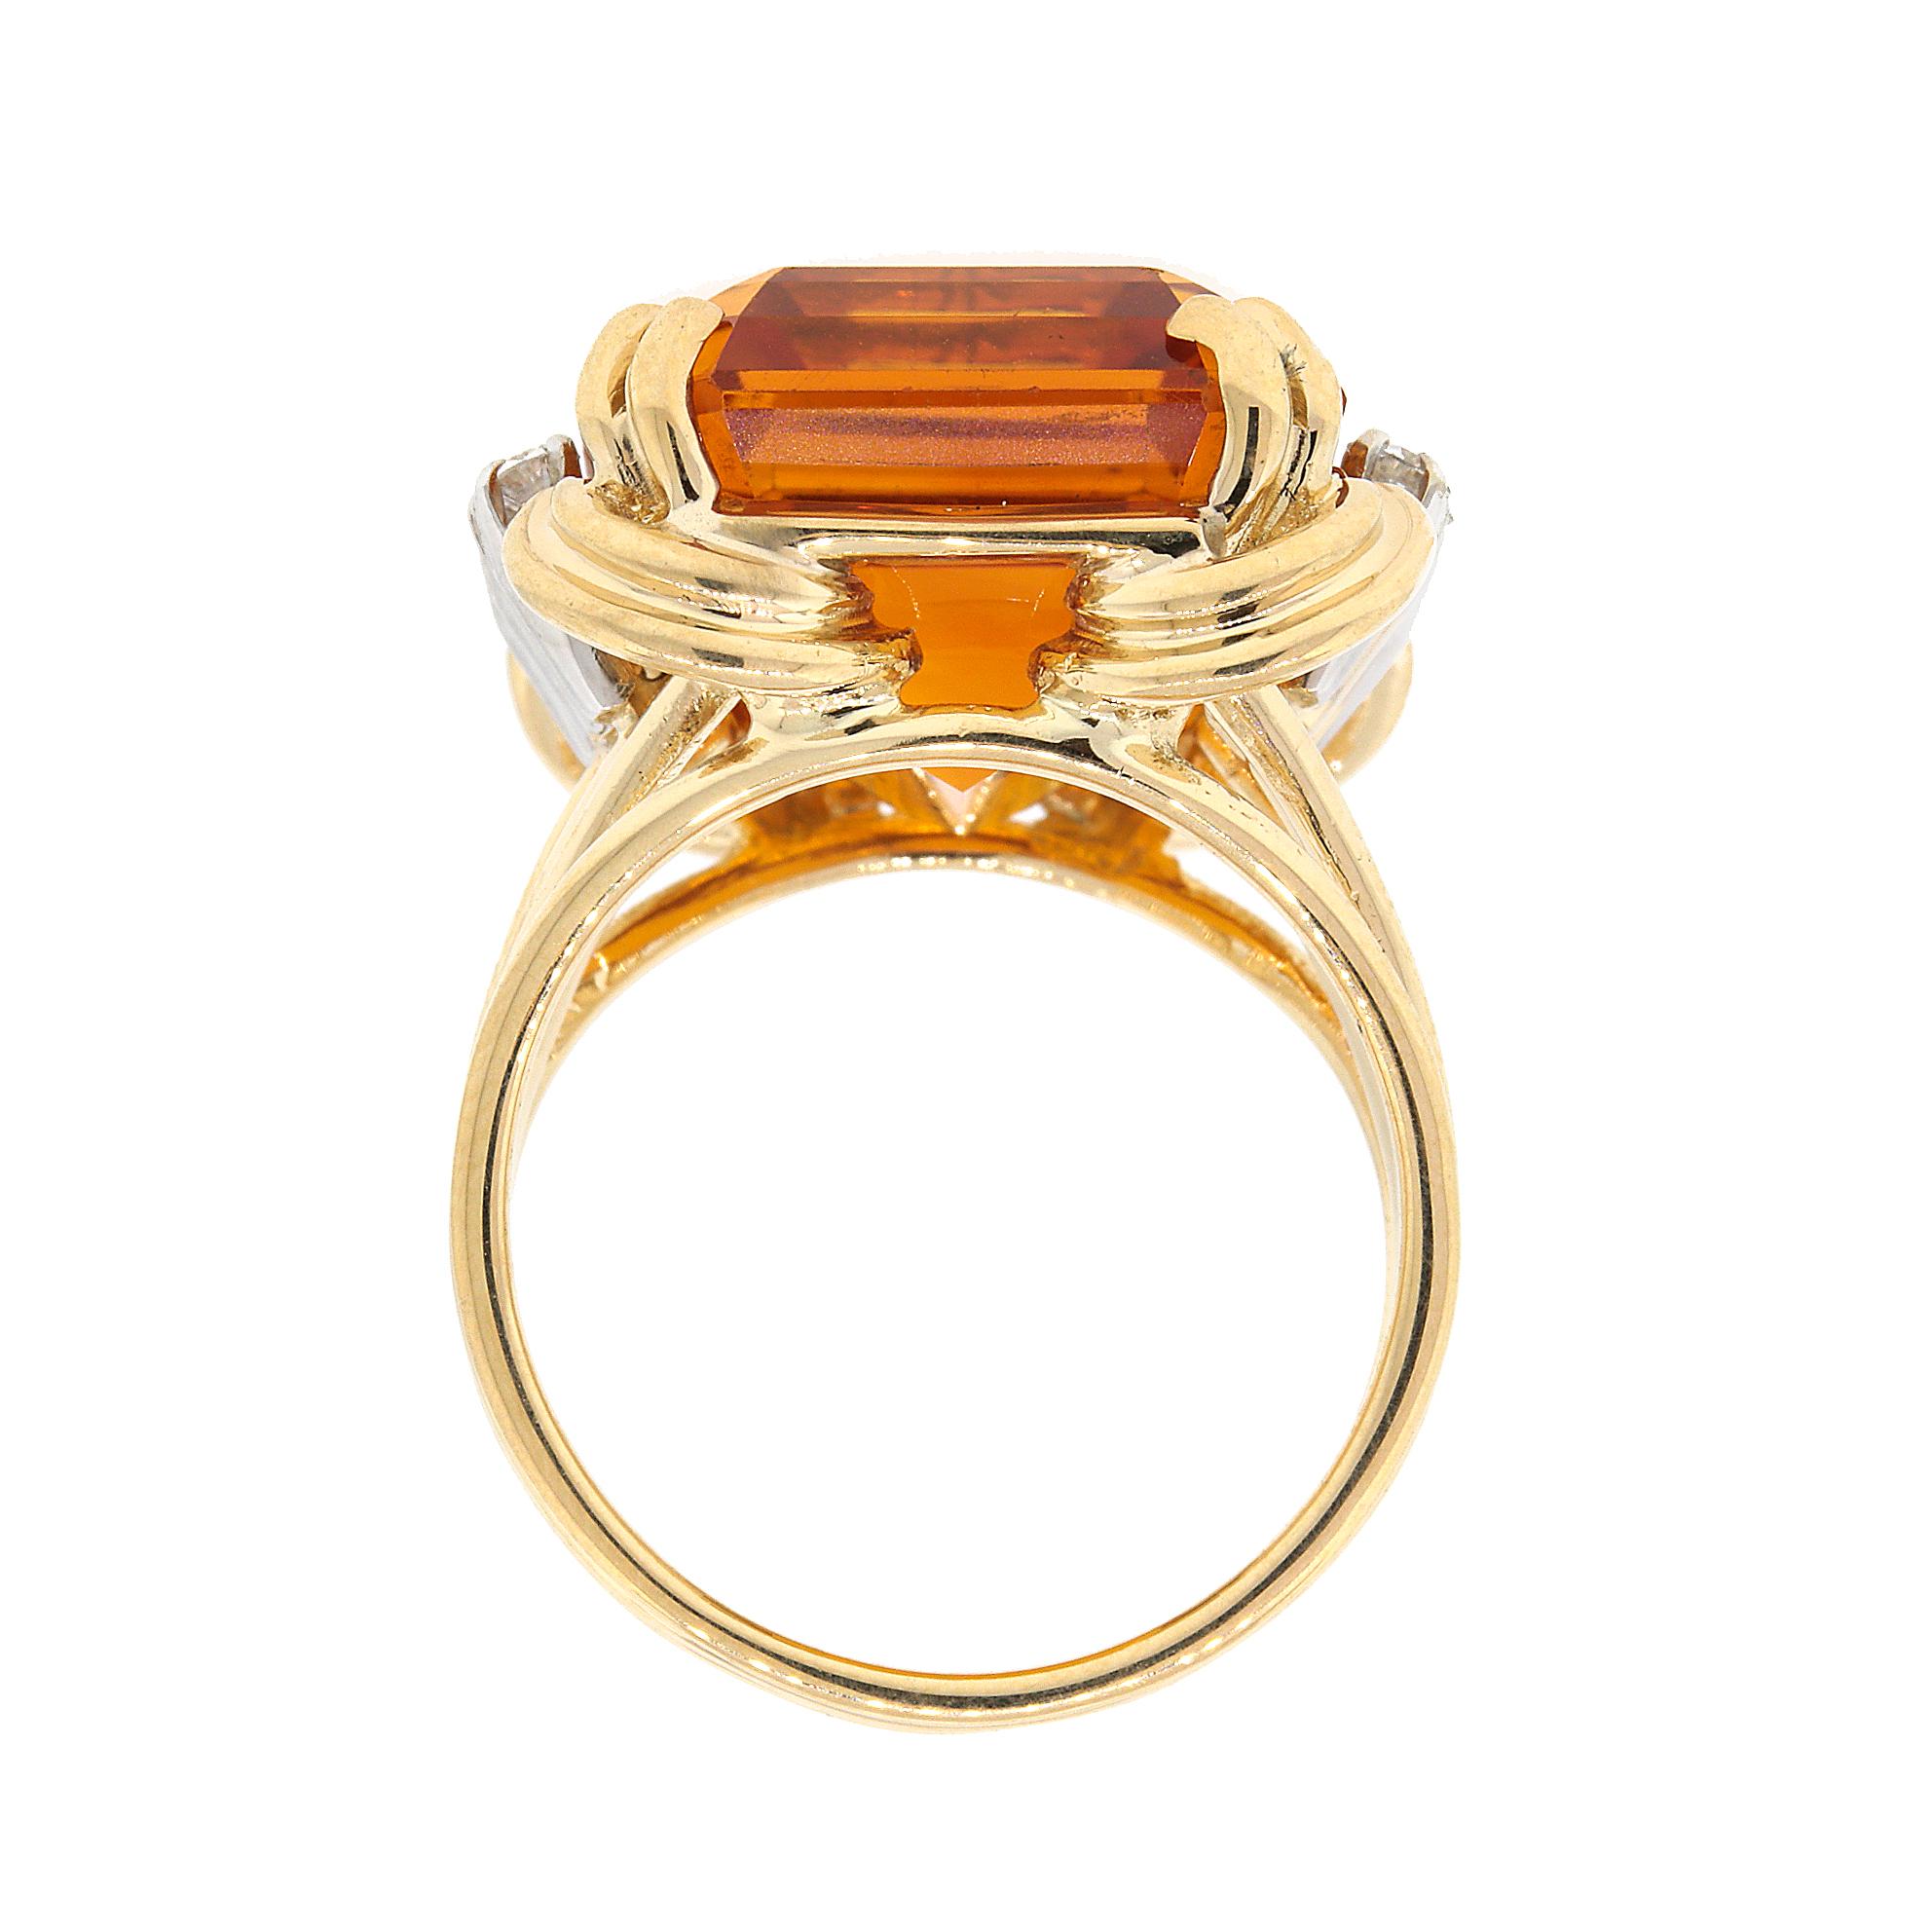 14 kt Yellow Gold
Citrine: 17.00 tcw
Diamond: 0.18 ct twd
Ring Size: 5.25
Total Weight: 10.3 grams